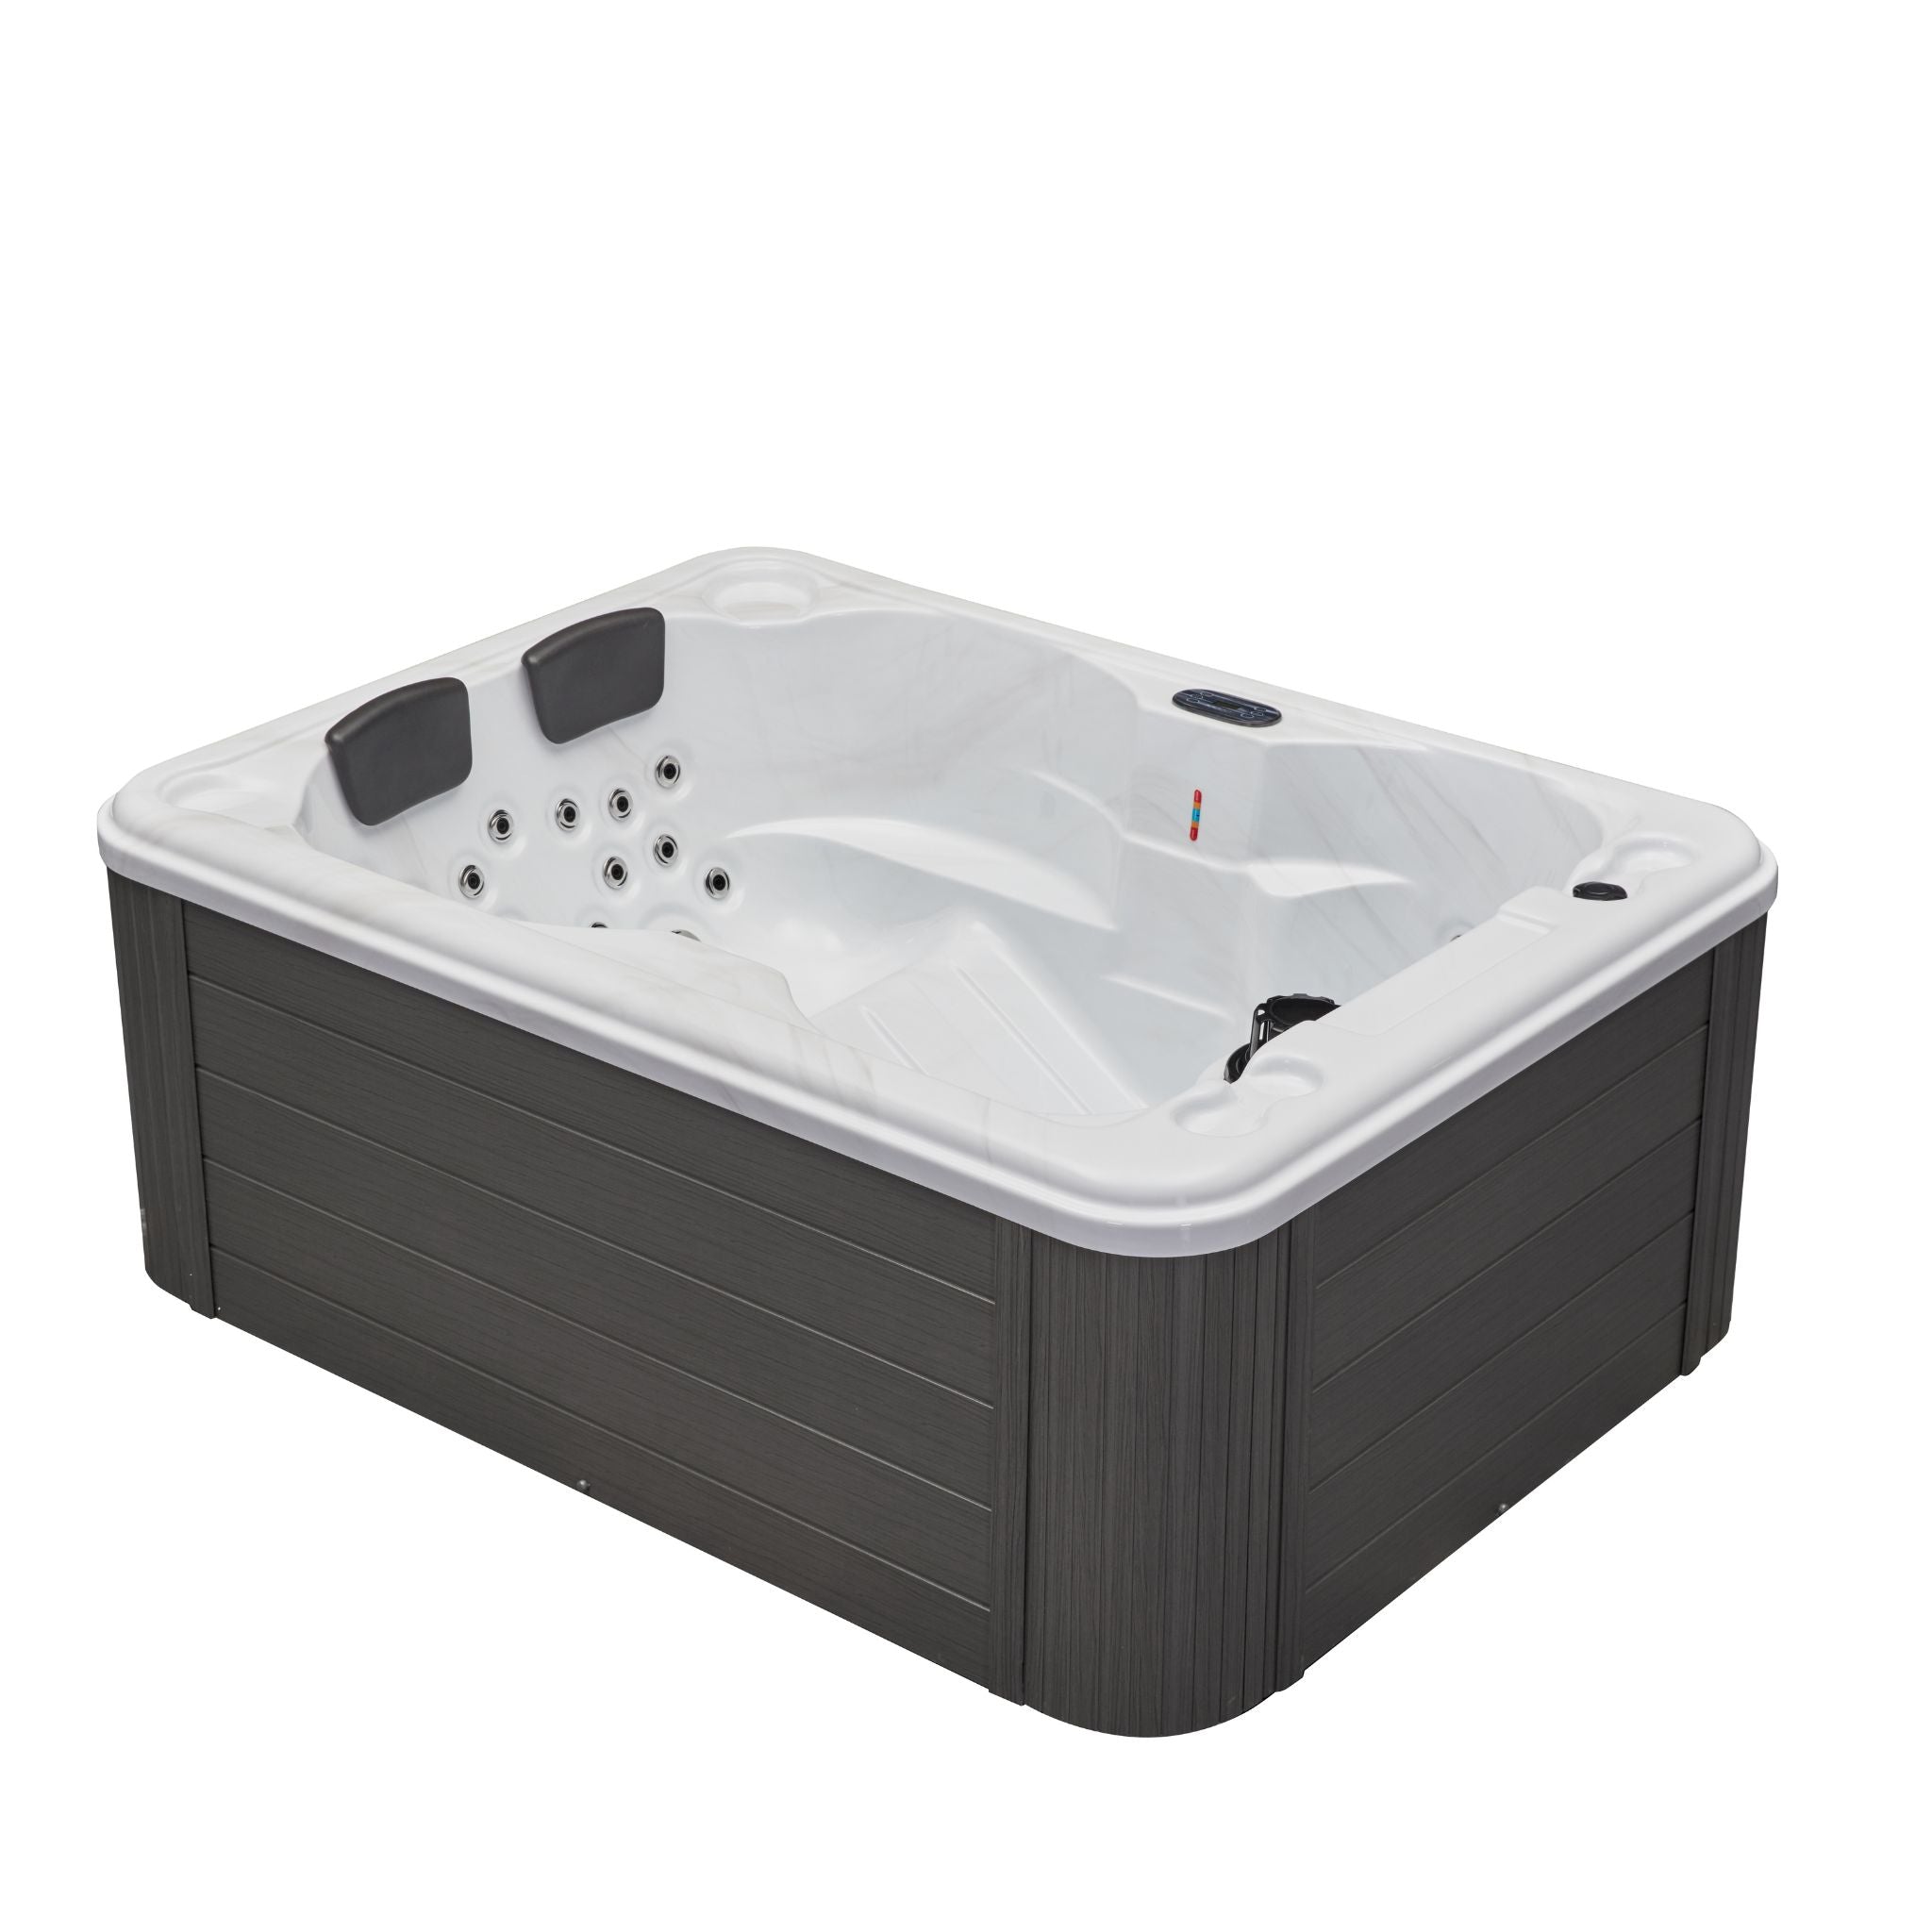 Regal 4-Person 39 Jet Hot Tub with Pearl Grey Interior and Ozonator